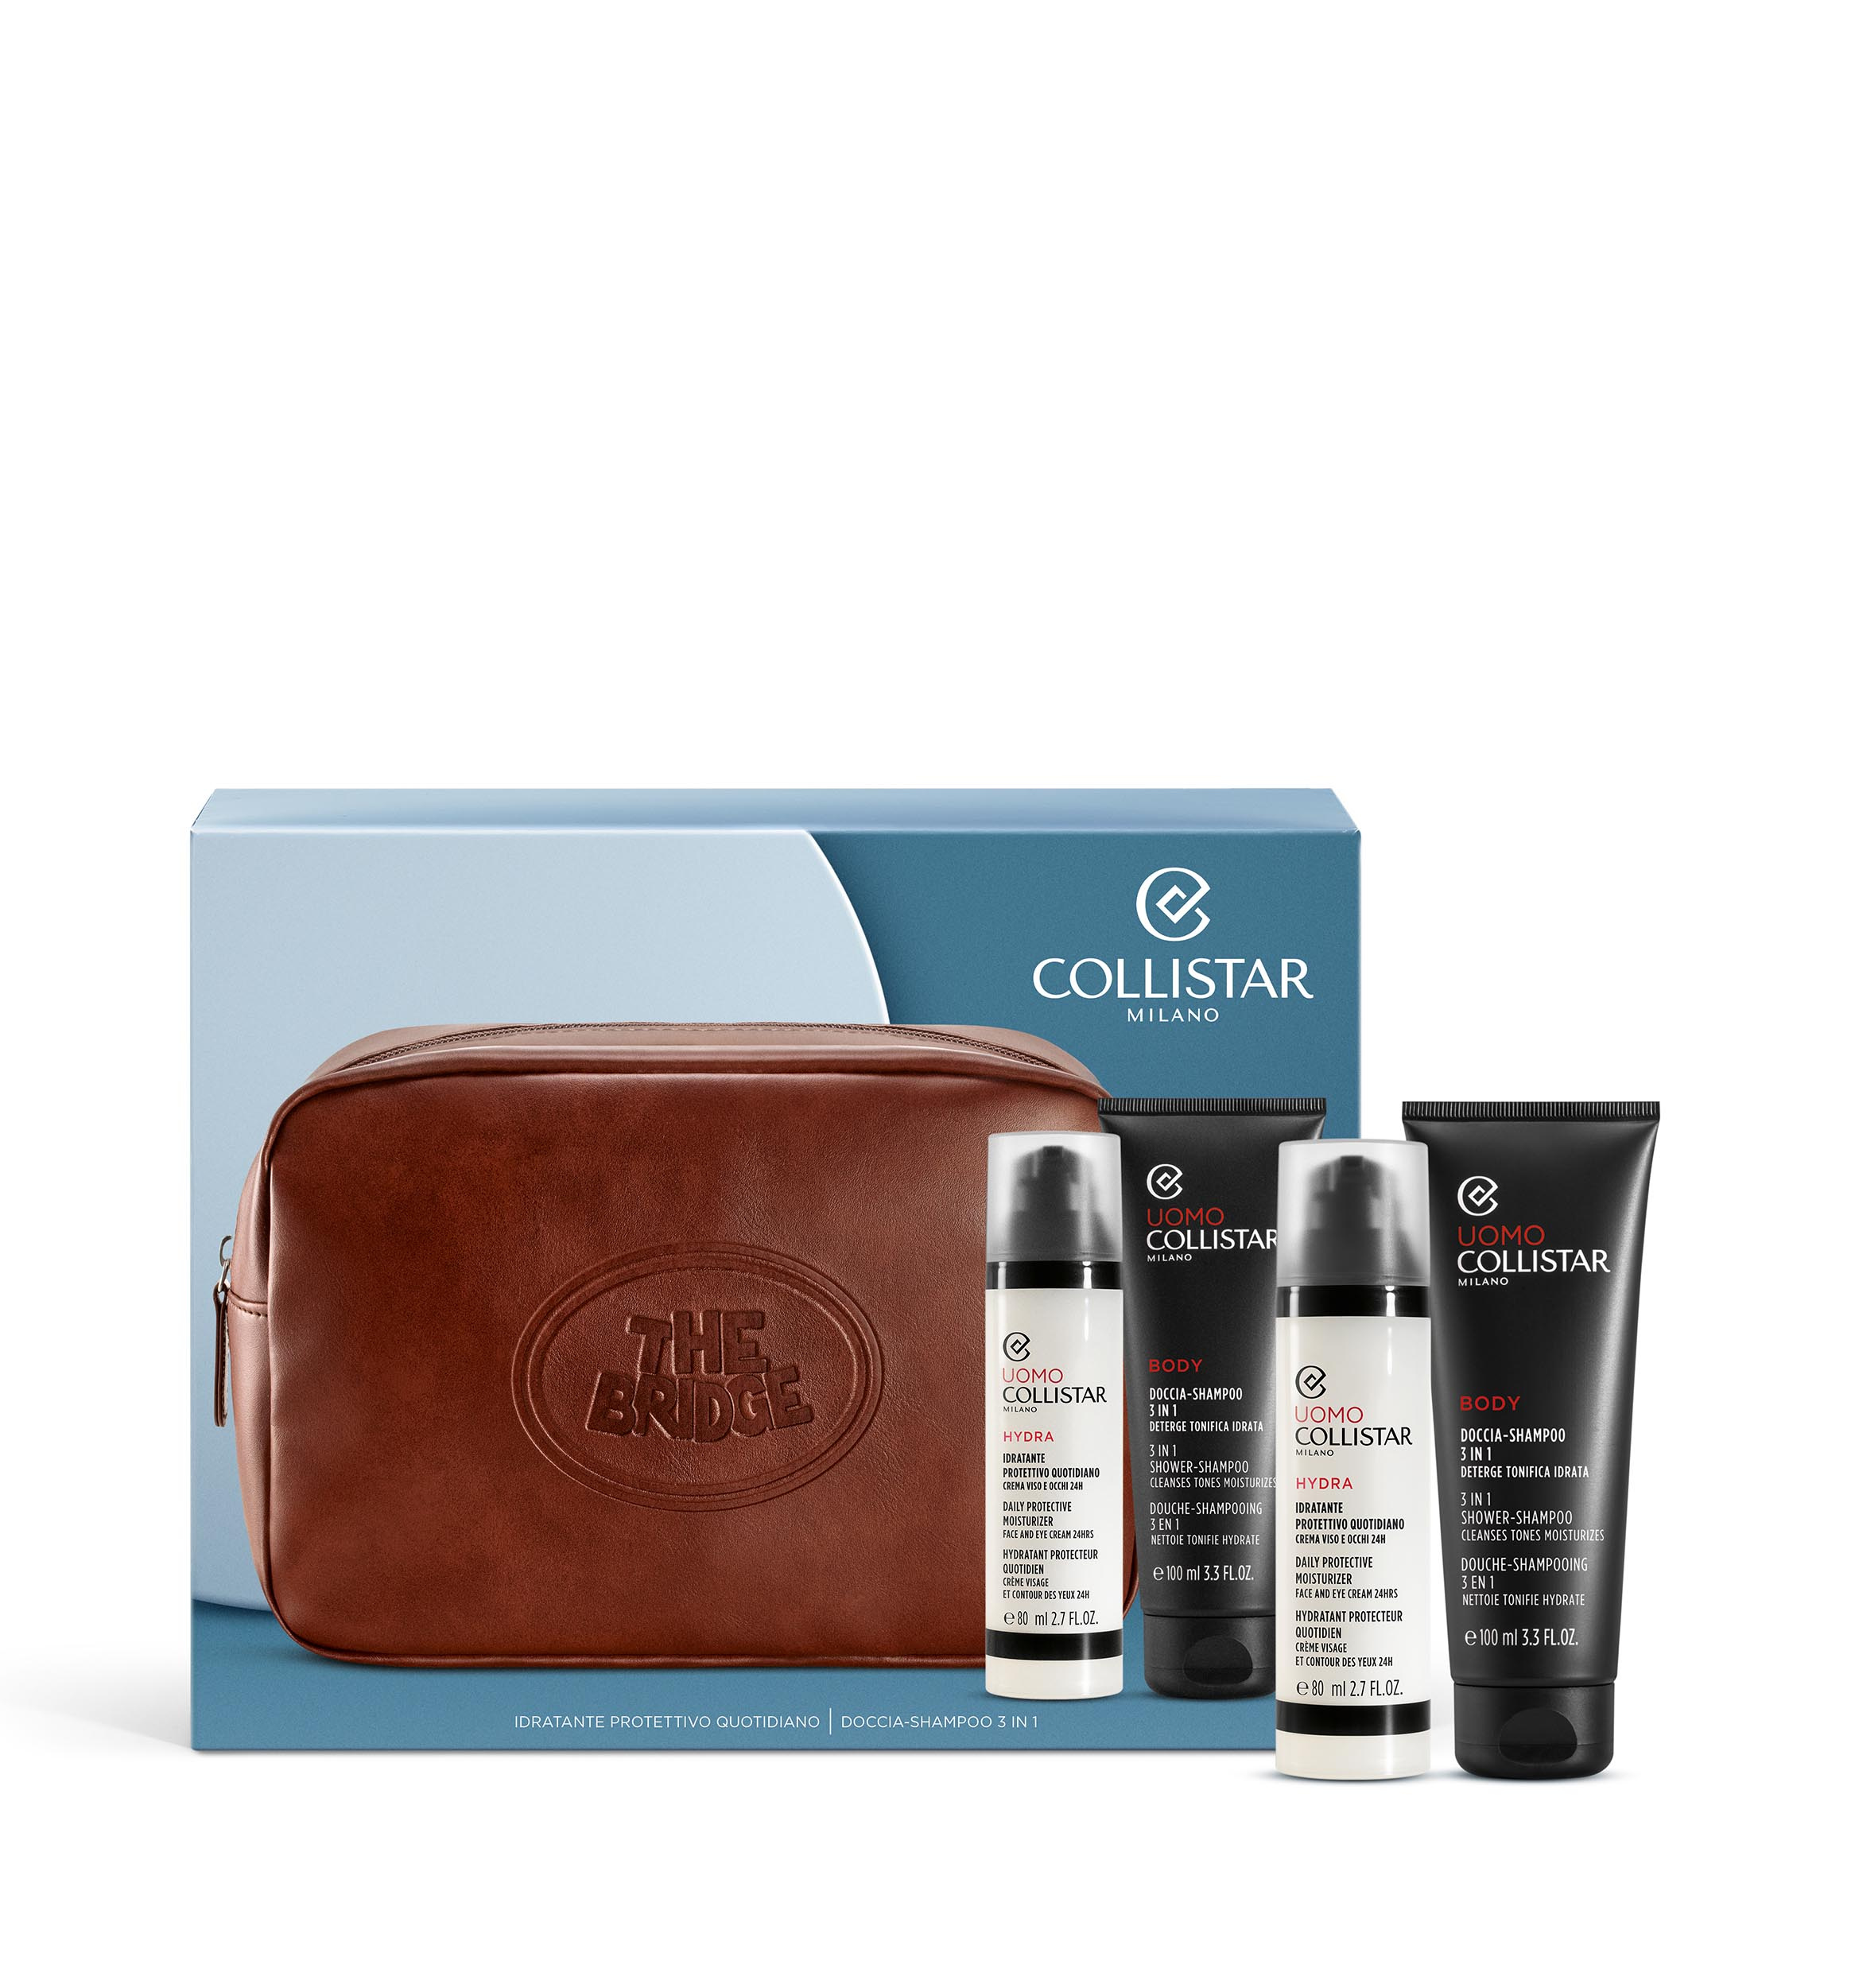 DAILY PROTECTIVE MOISTURIZER FACE 80 ml GIFT SET - Black Friday Special | Collistar - Shop Online Ufficiale